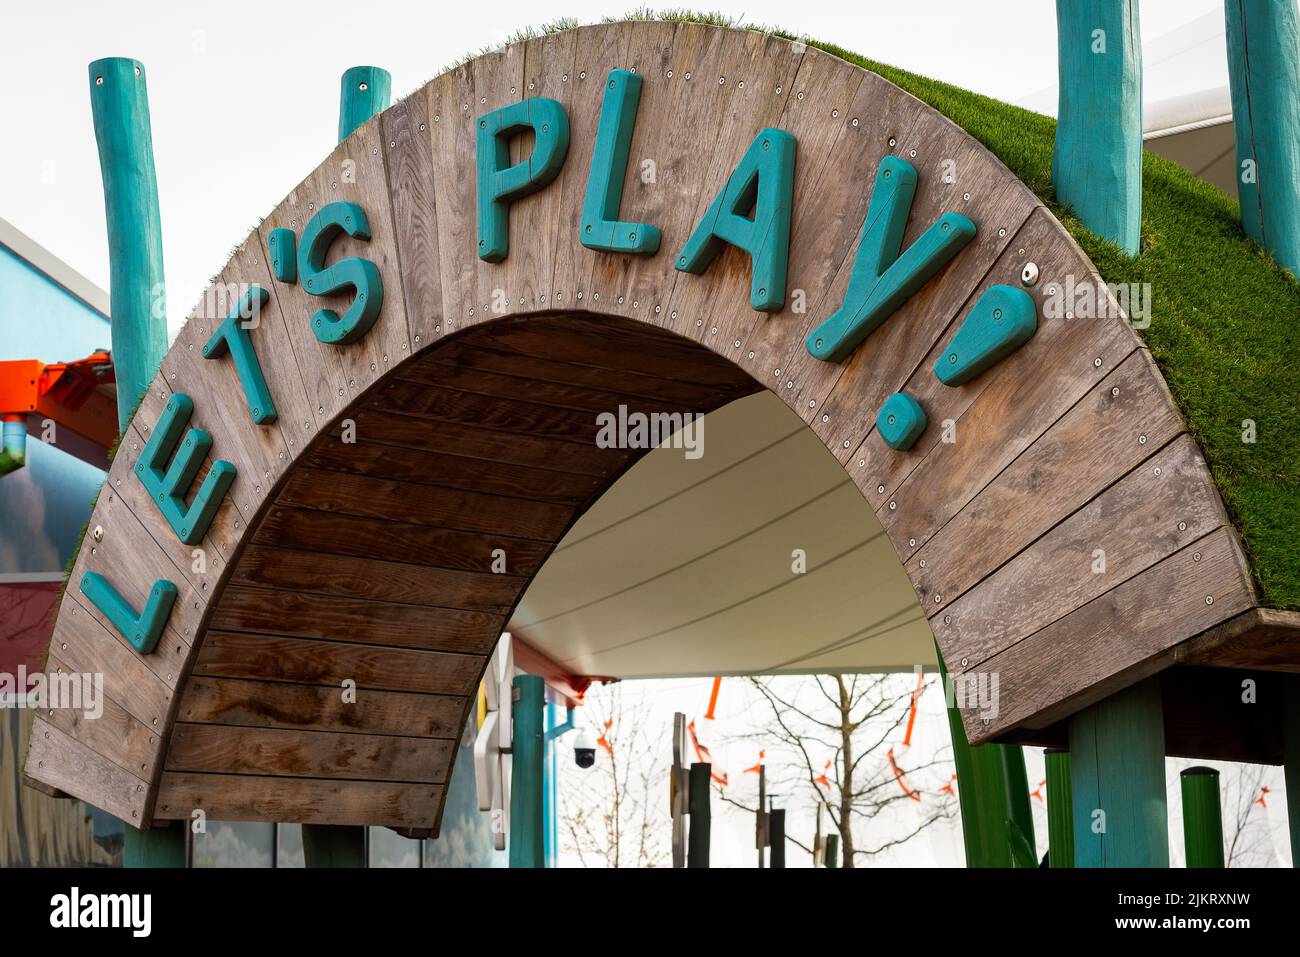 Let's Play children's playground wooden entrance sign.  Stock Photo